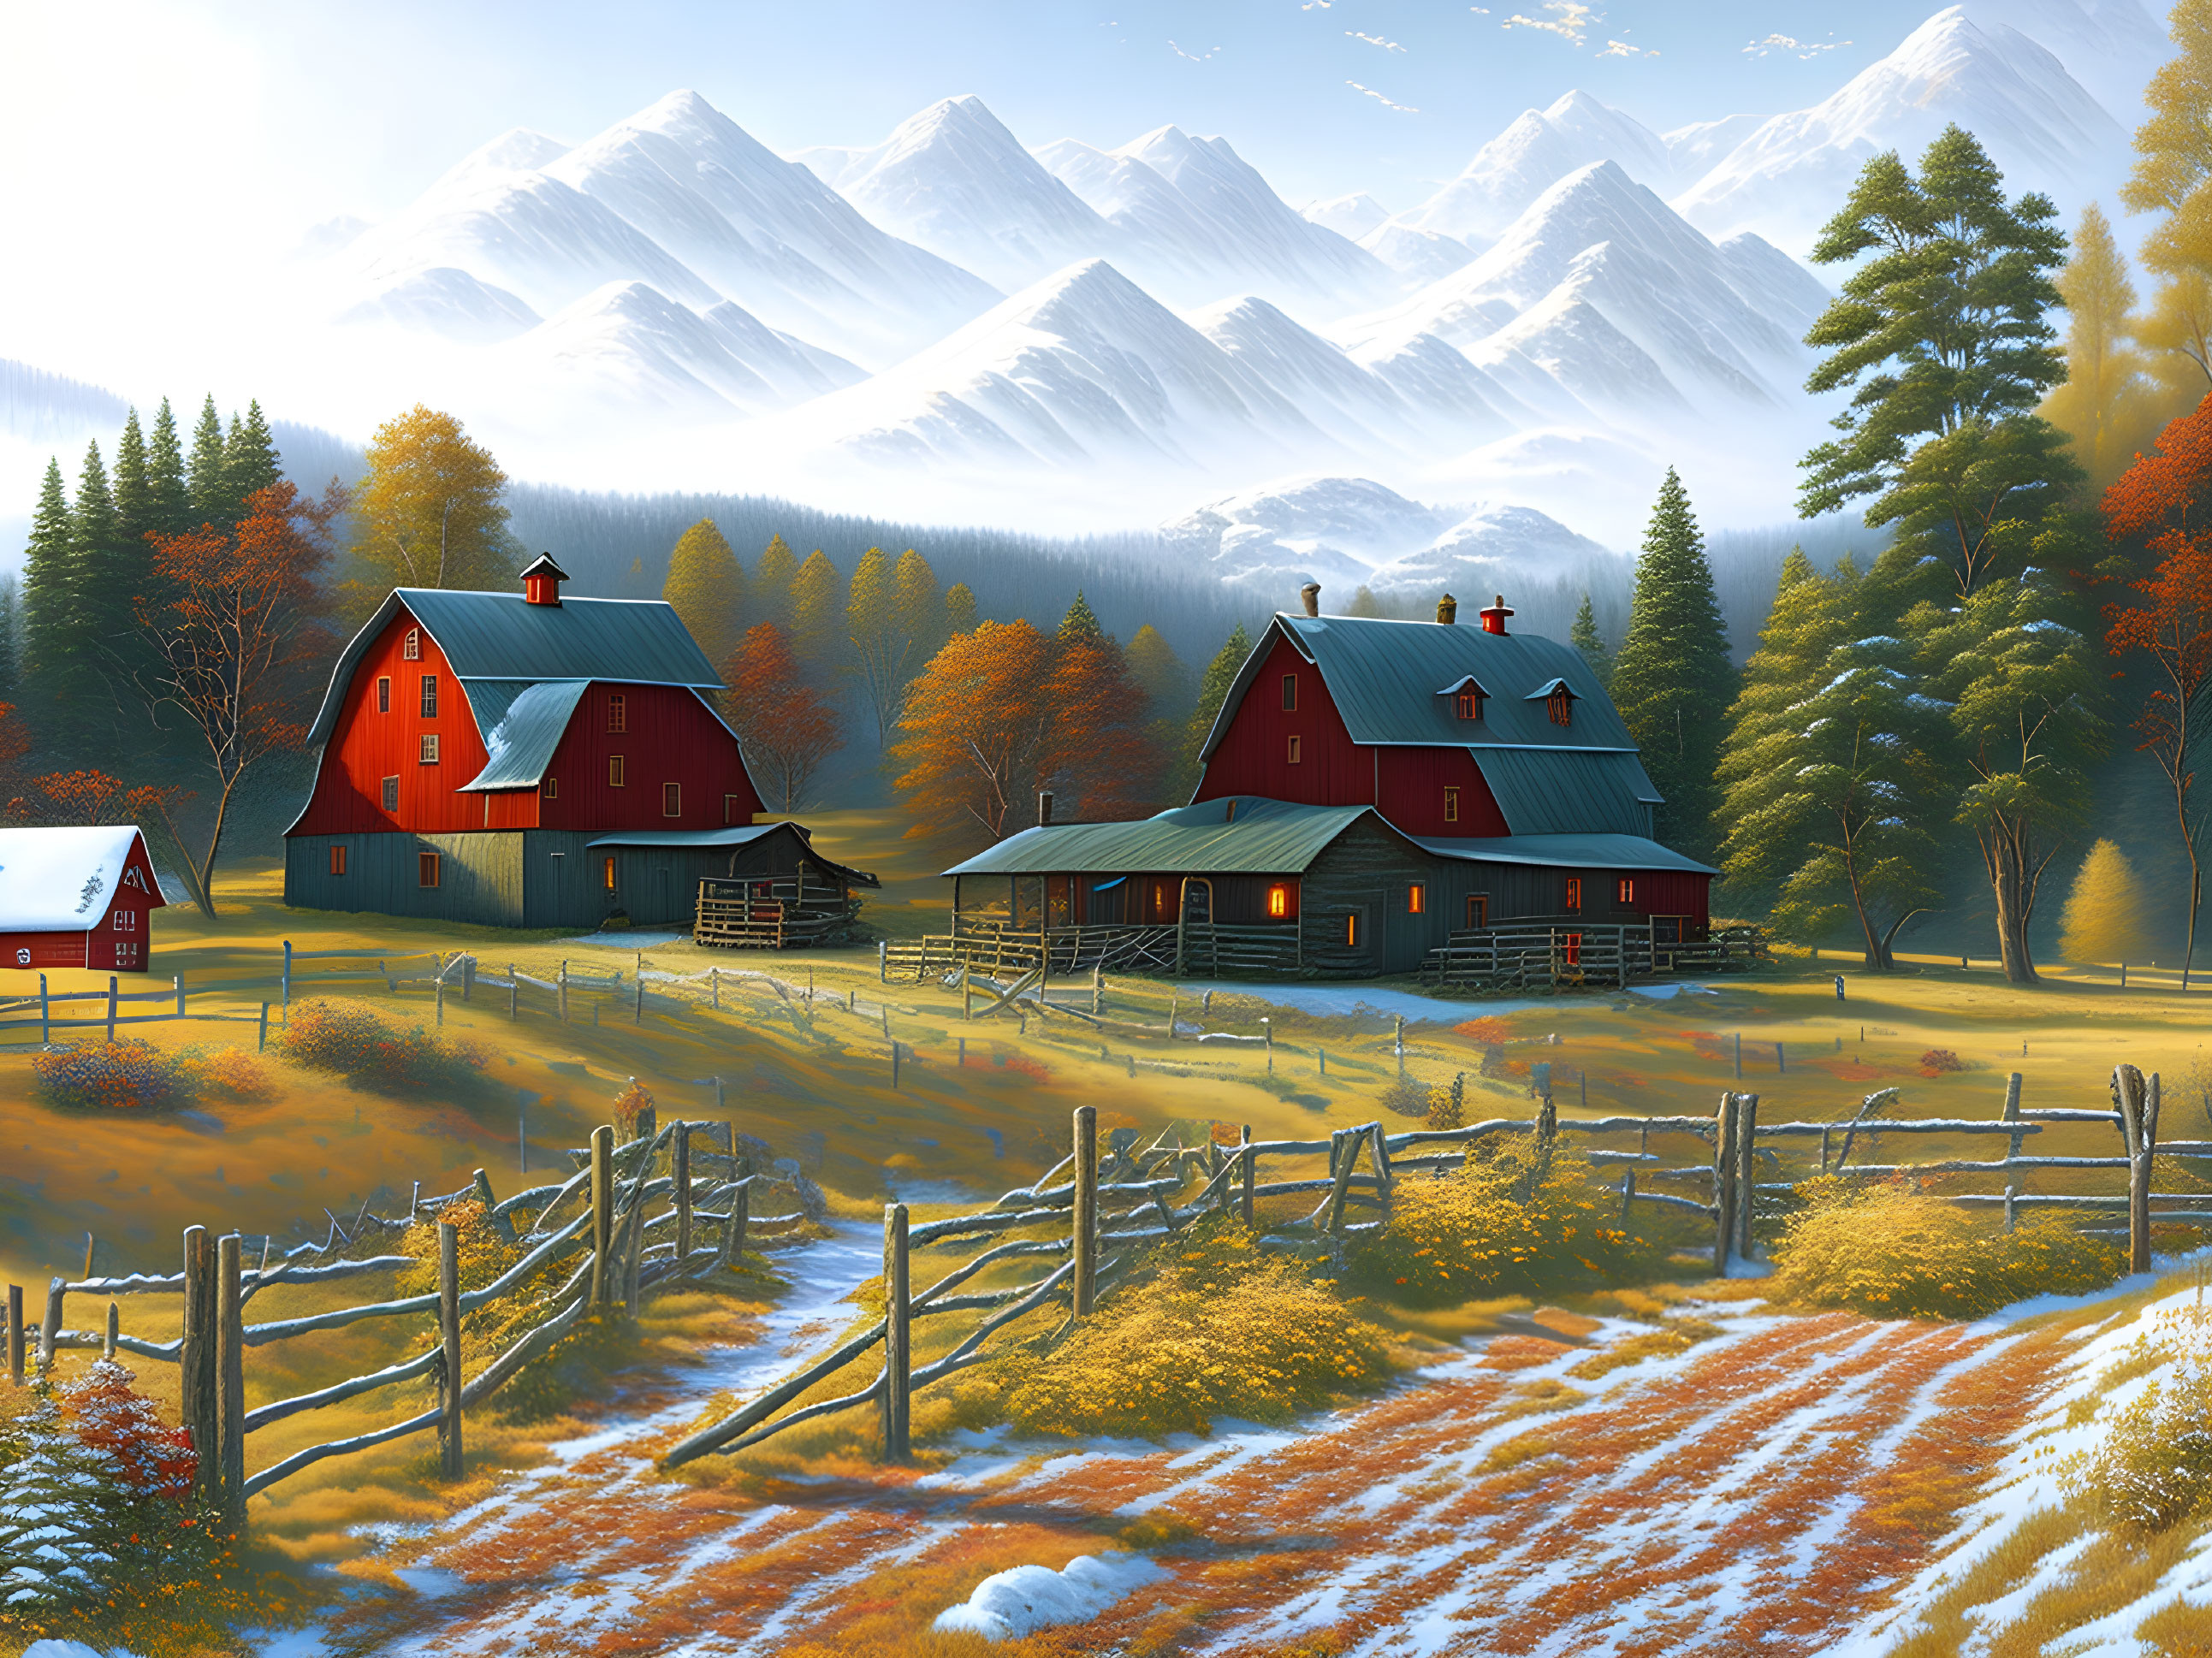 Tranquil autumn scene with red farmhouses, golden trees, and snow-capped mountains